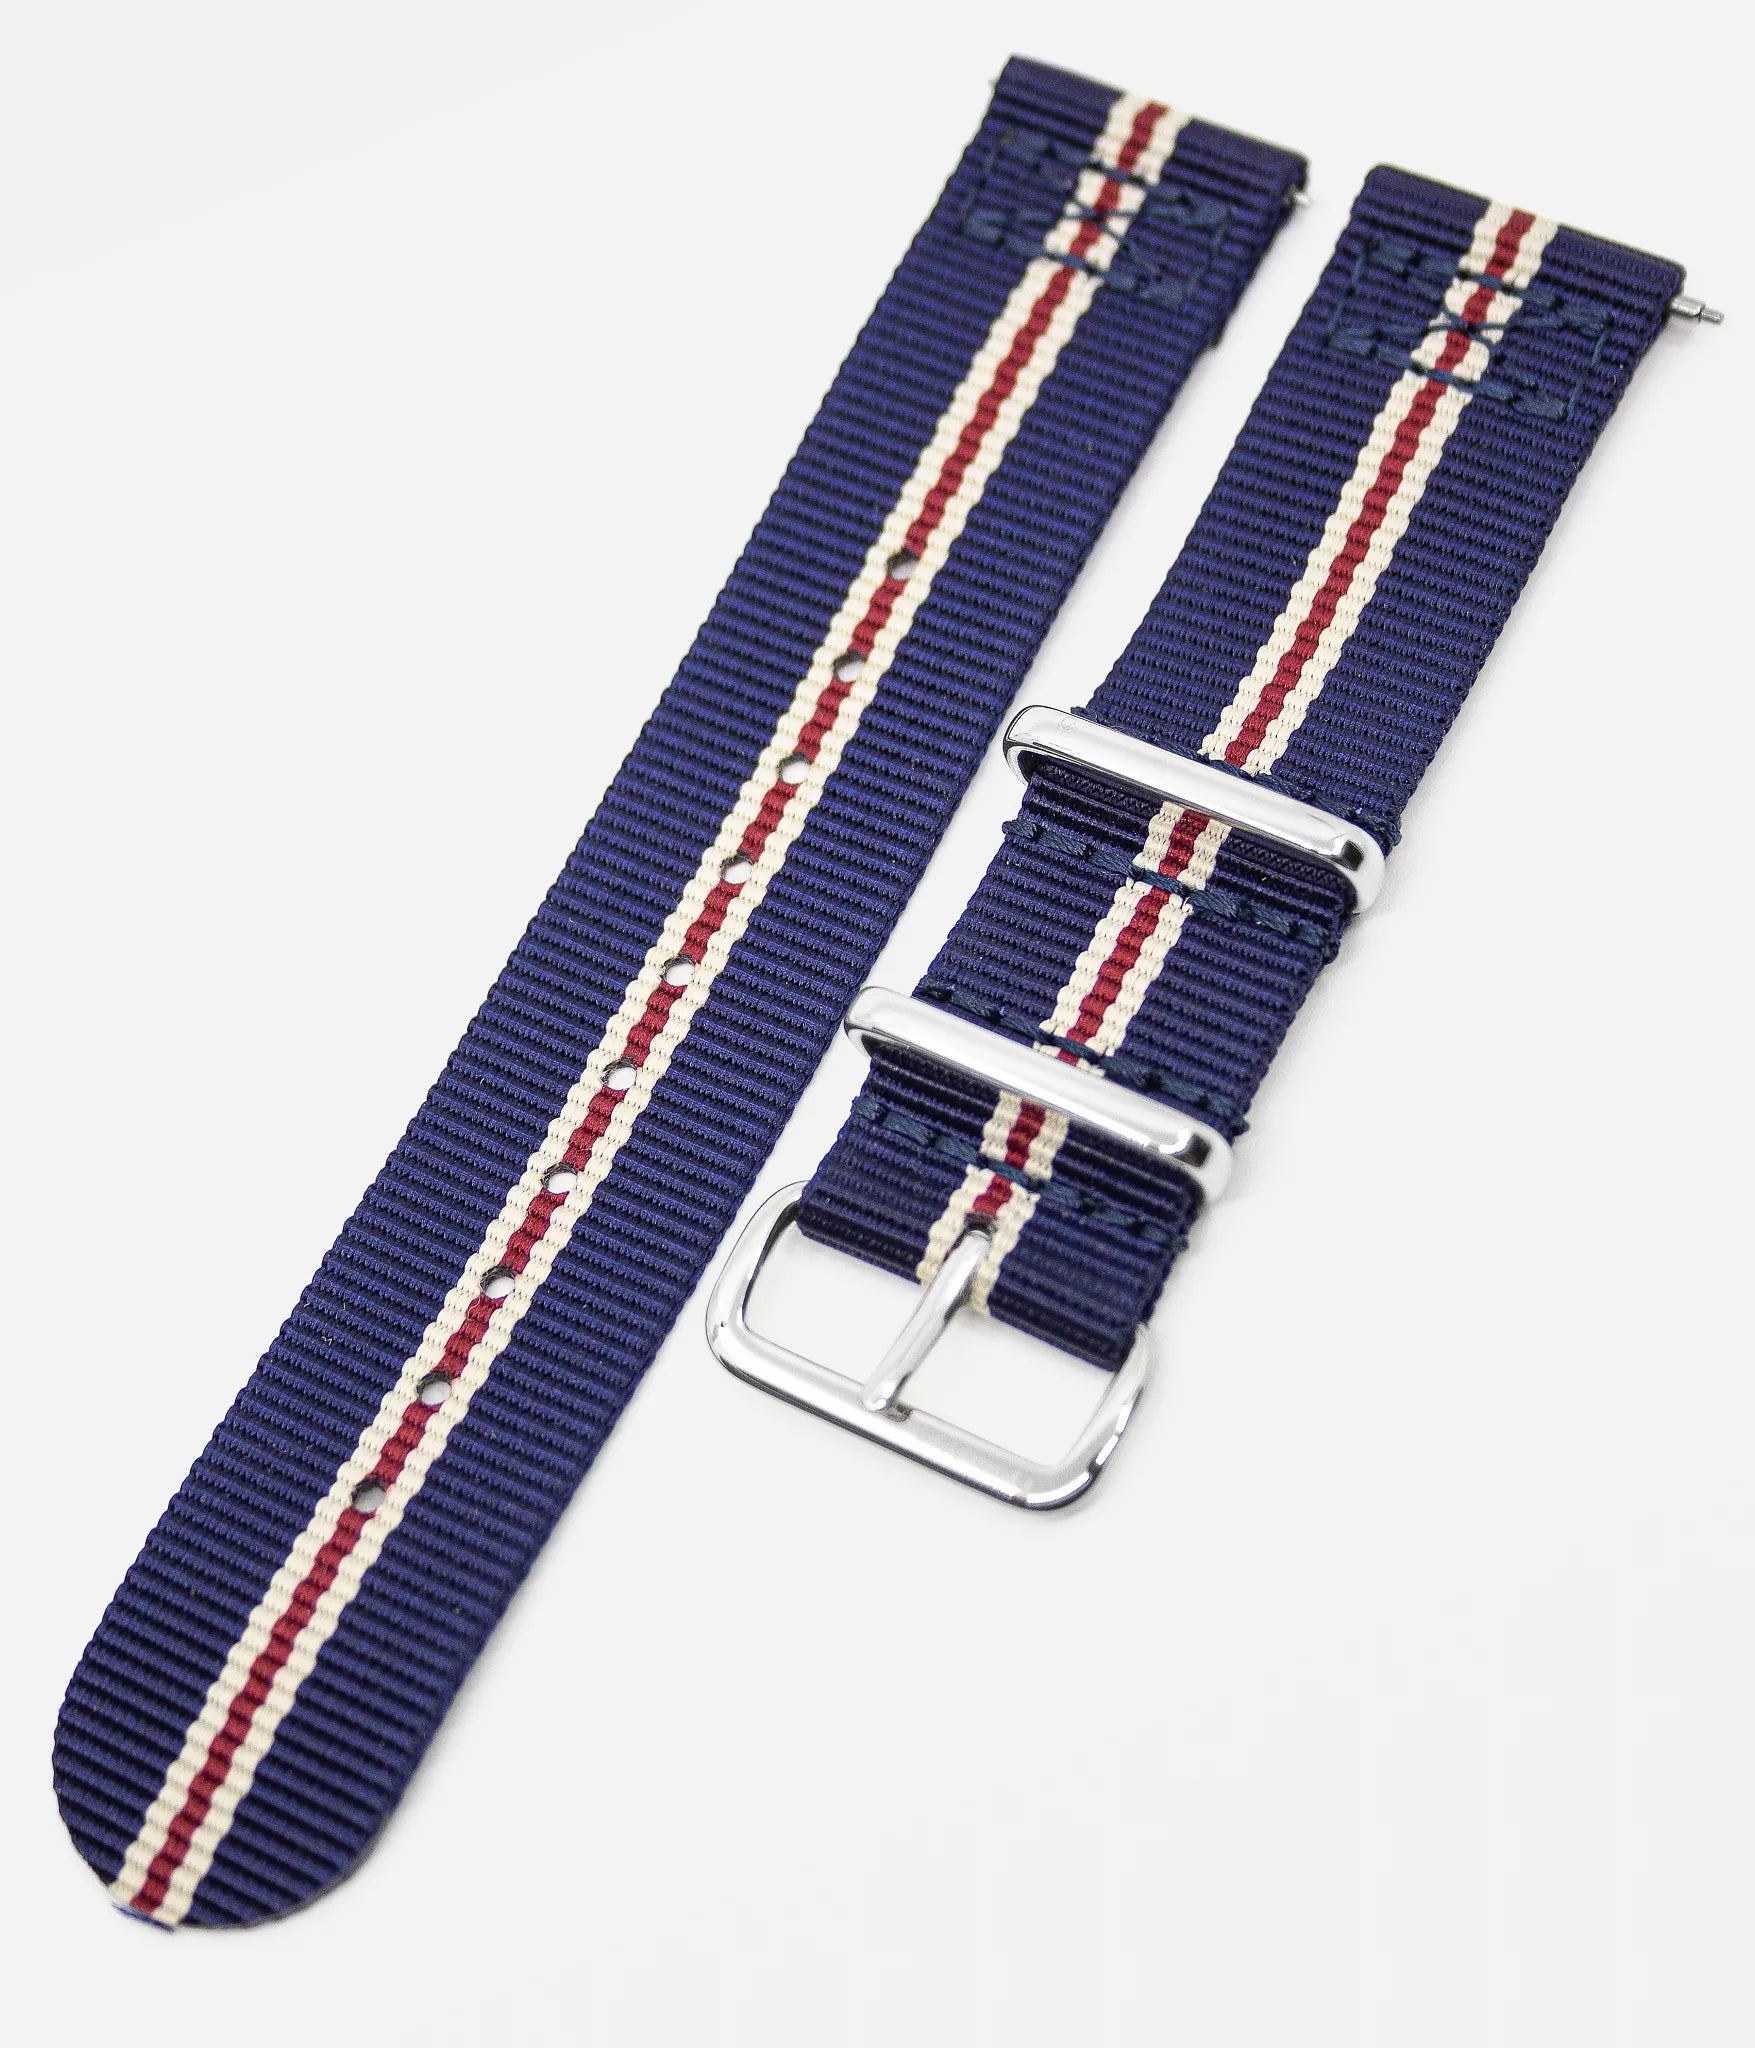 Watch strap shot - Fjordson matching watches with white dial and striped navy blue NATO nylon watch strap - Couple Watches Gift set - vegan & approved by PETA - Swiss made